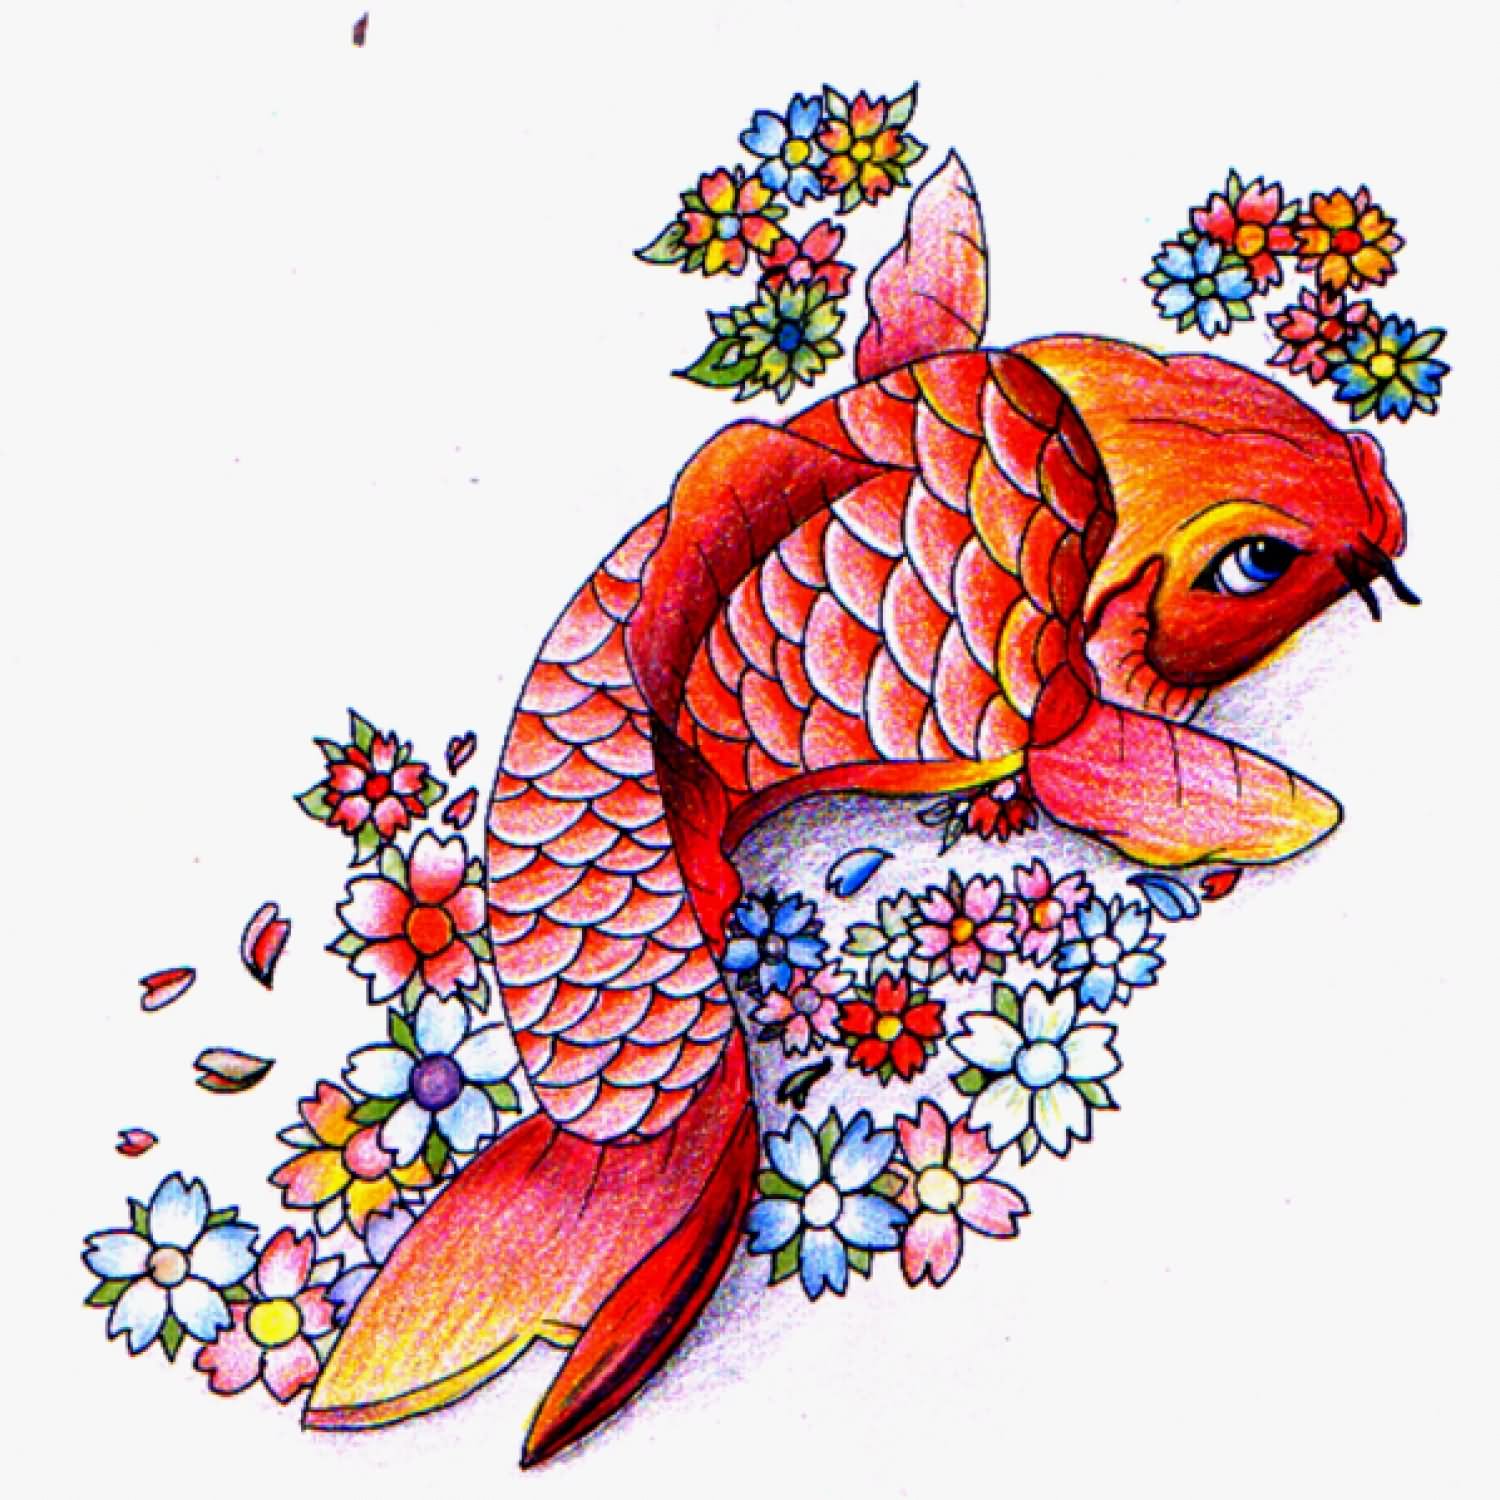 Carp Fish With Colorful Flowers Tattoo Design